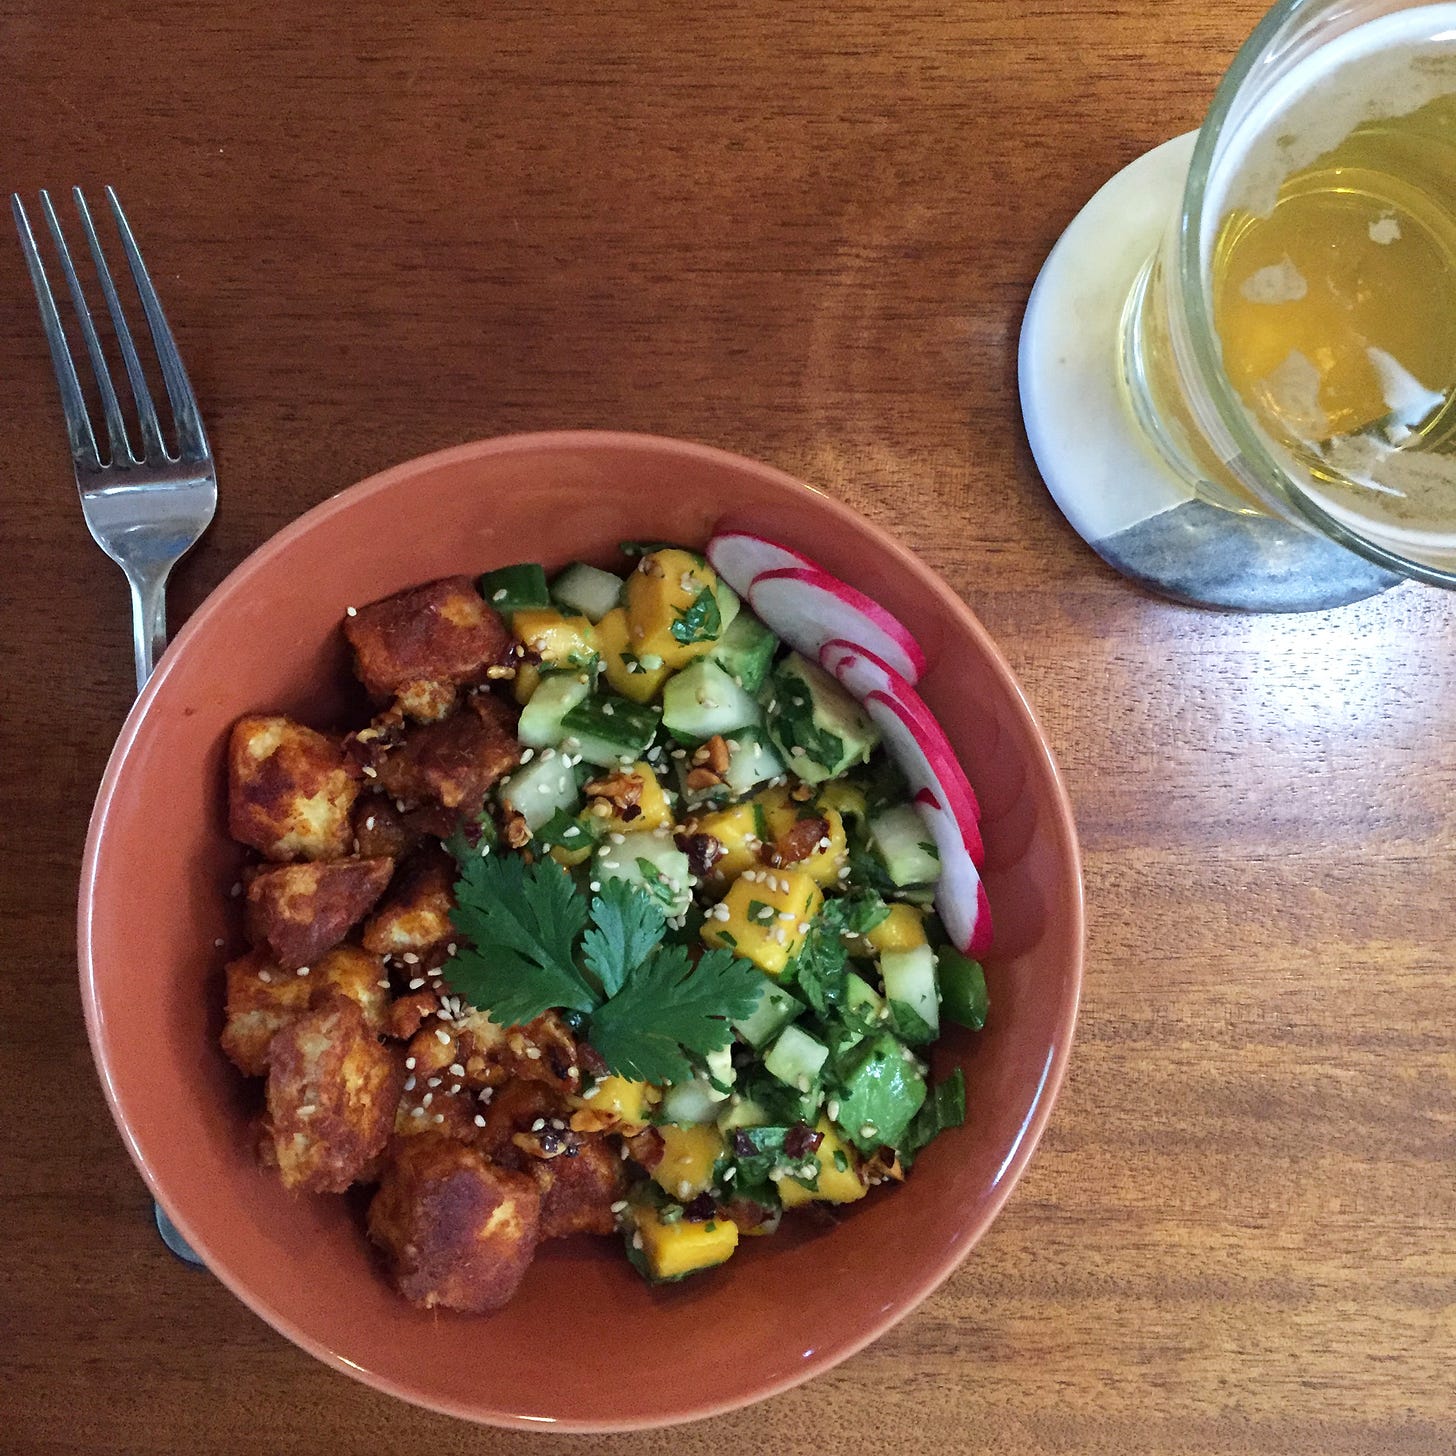 An orange bowl full of pieces of tofu in a red curry coating, and a salad of cucumber, mango, and avocado pieces. Cilantro and sesame seeds are on top, and a sliced radish is at the side of the bowl. Next to it on a coaster is a glass of lager.